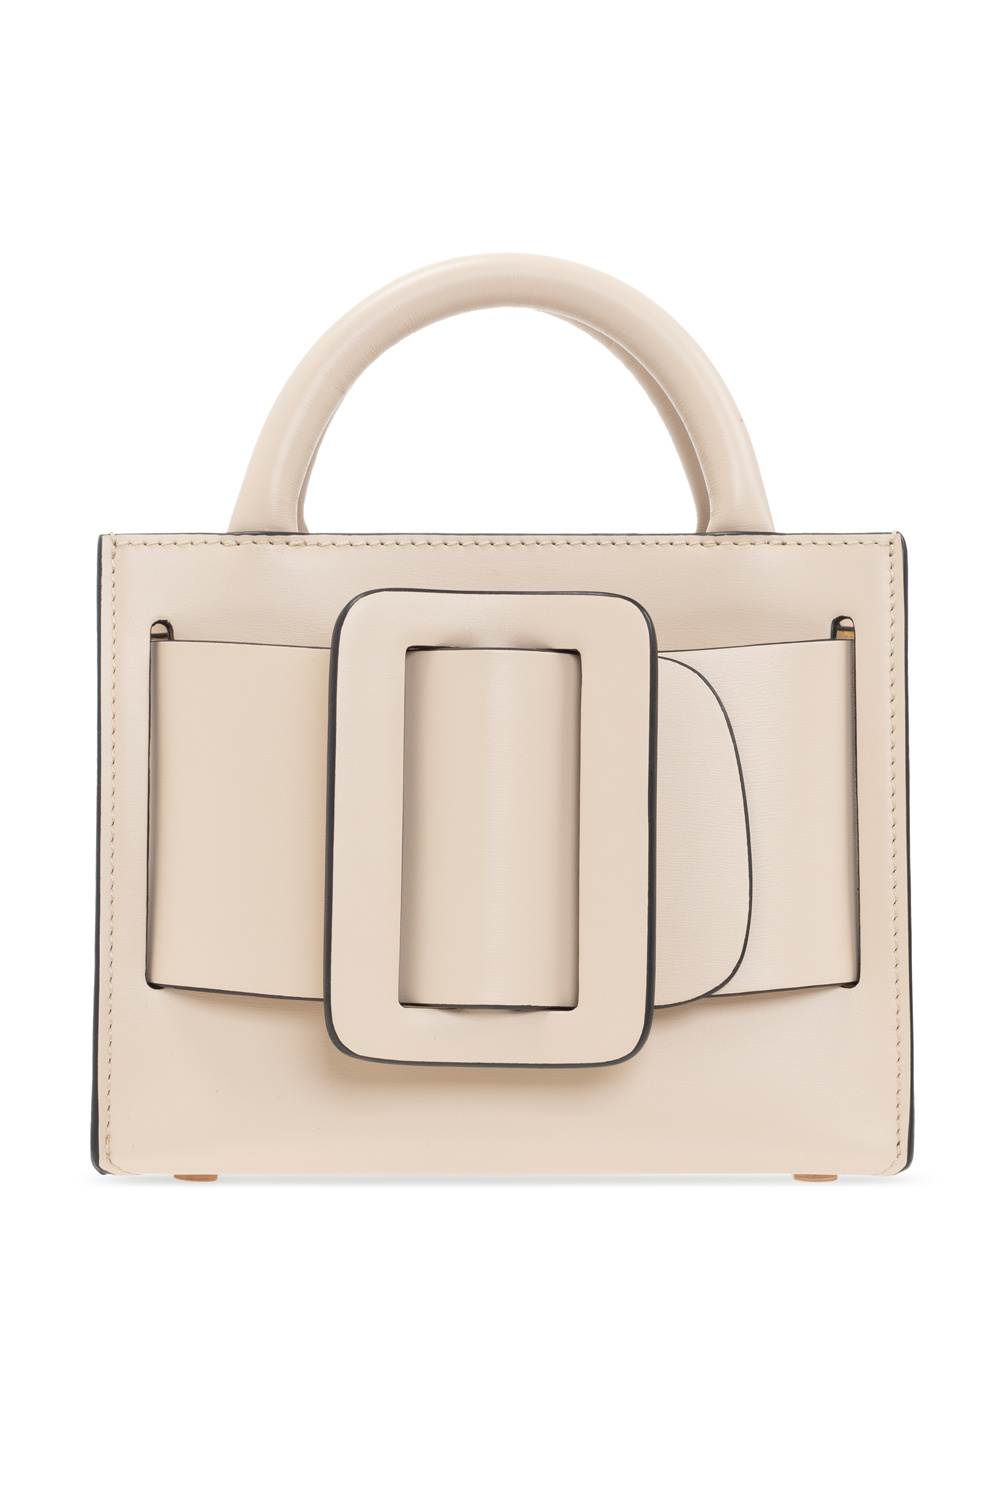 Bobby 18 Bag in Ivory Leather